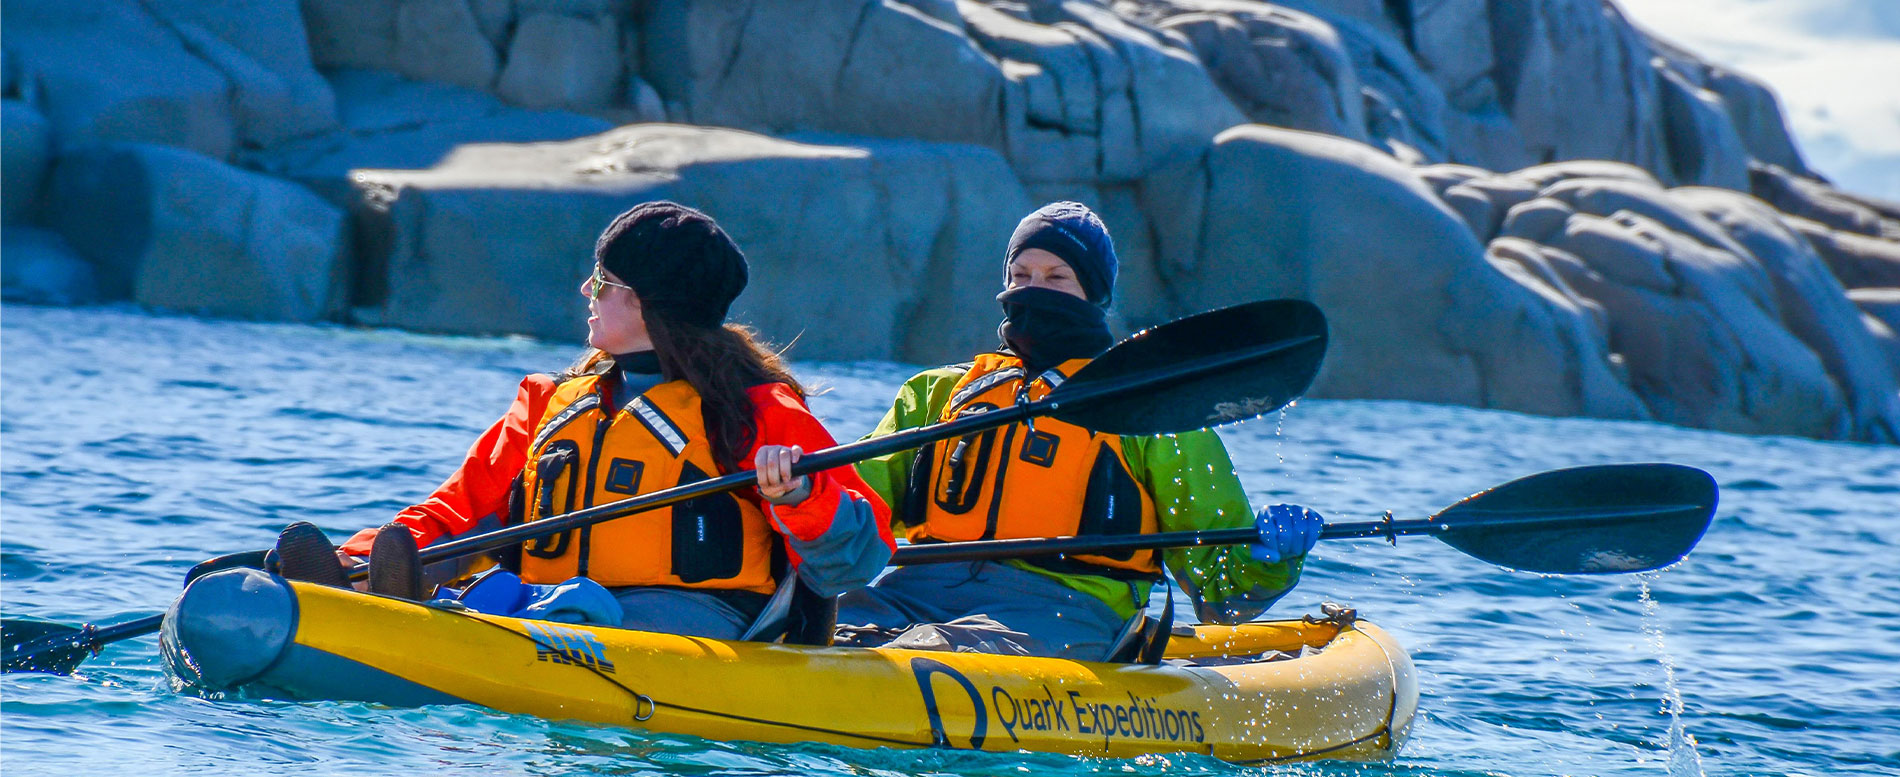 What To Wear For Kayaking Men and Women: An Ultimate Paddling Dress Code